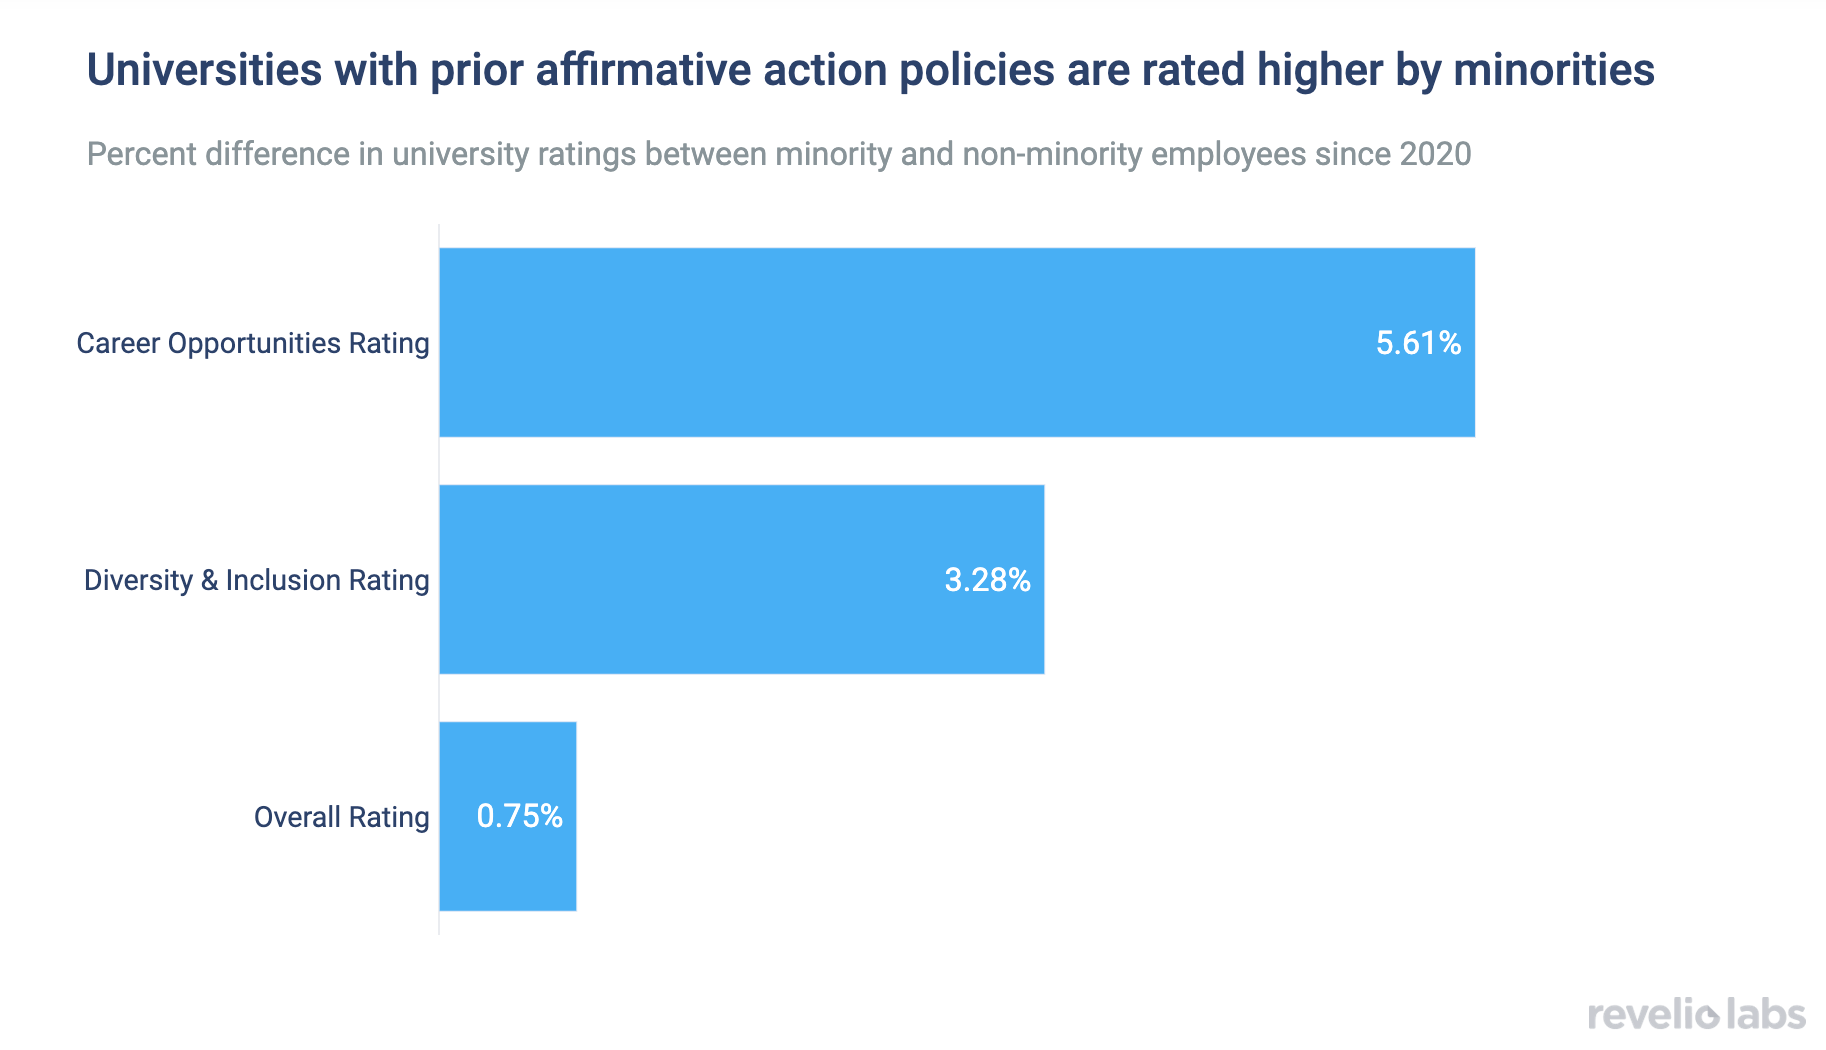 Universities with prior affirmative action policies are rated higher by minorities